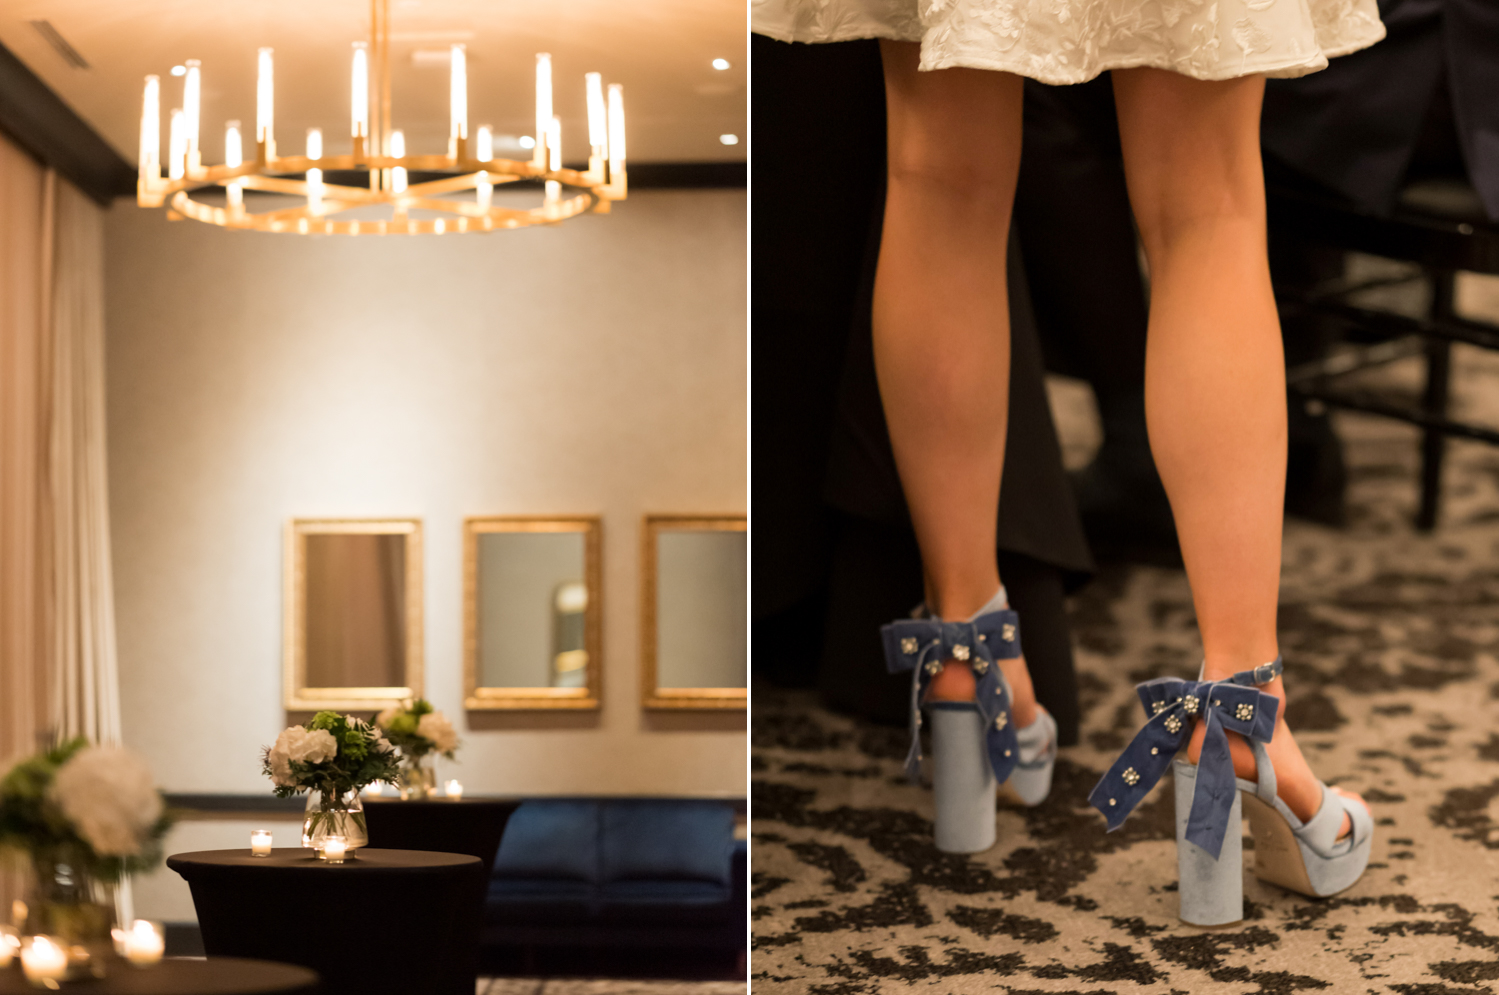 Left: The white and green flower arrangements at the rehearsal dinner sit on tall tables with black linens. Right: The bride shows off her blue platform heels with bejeweled bows on the back